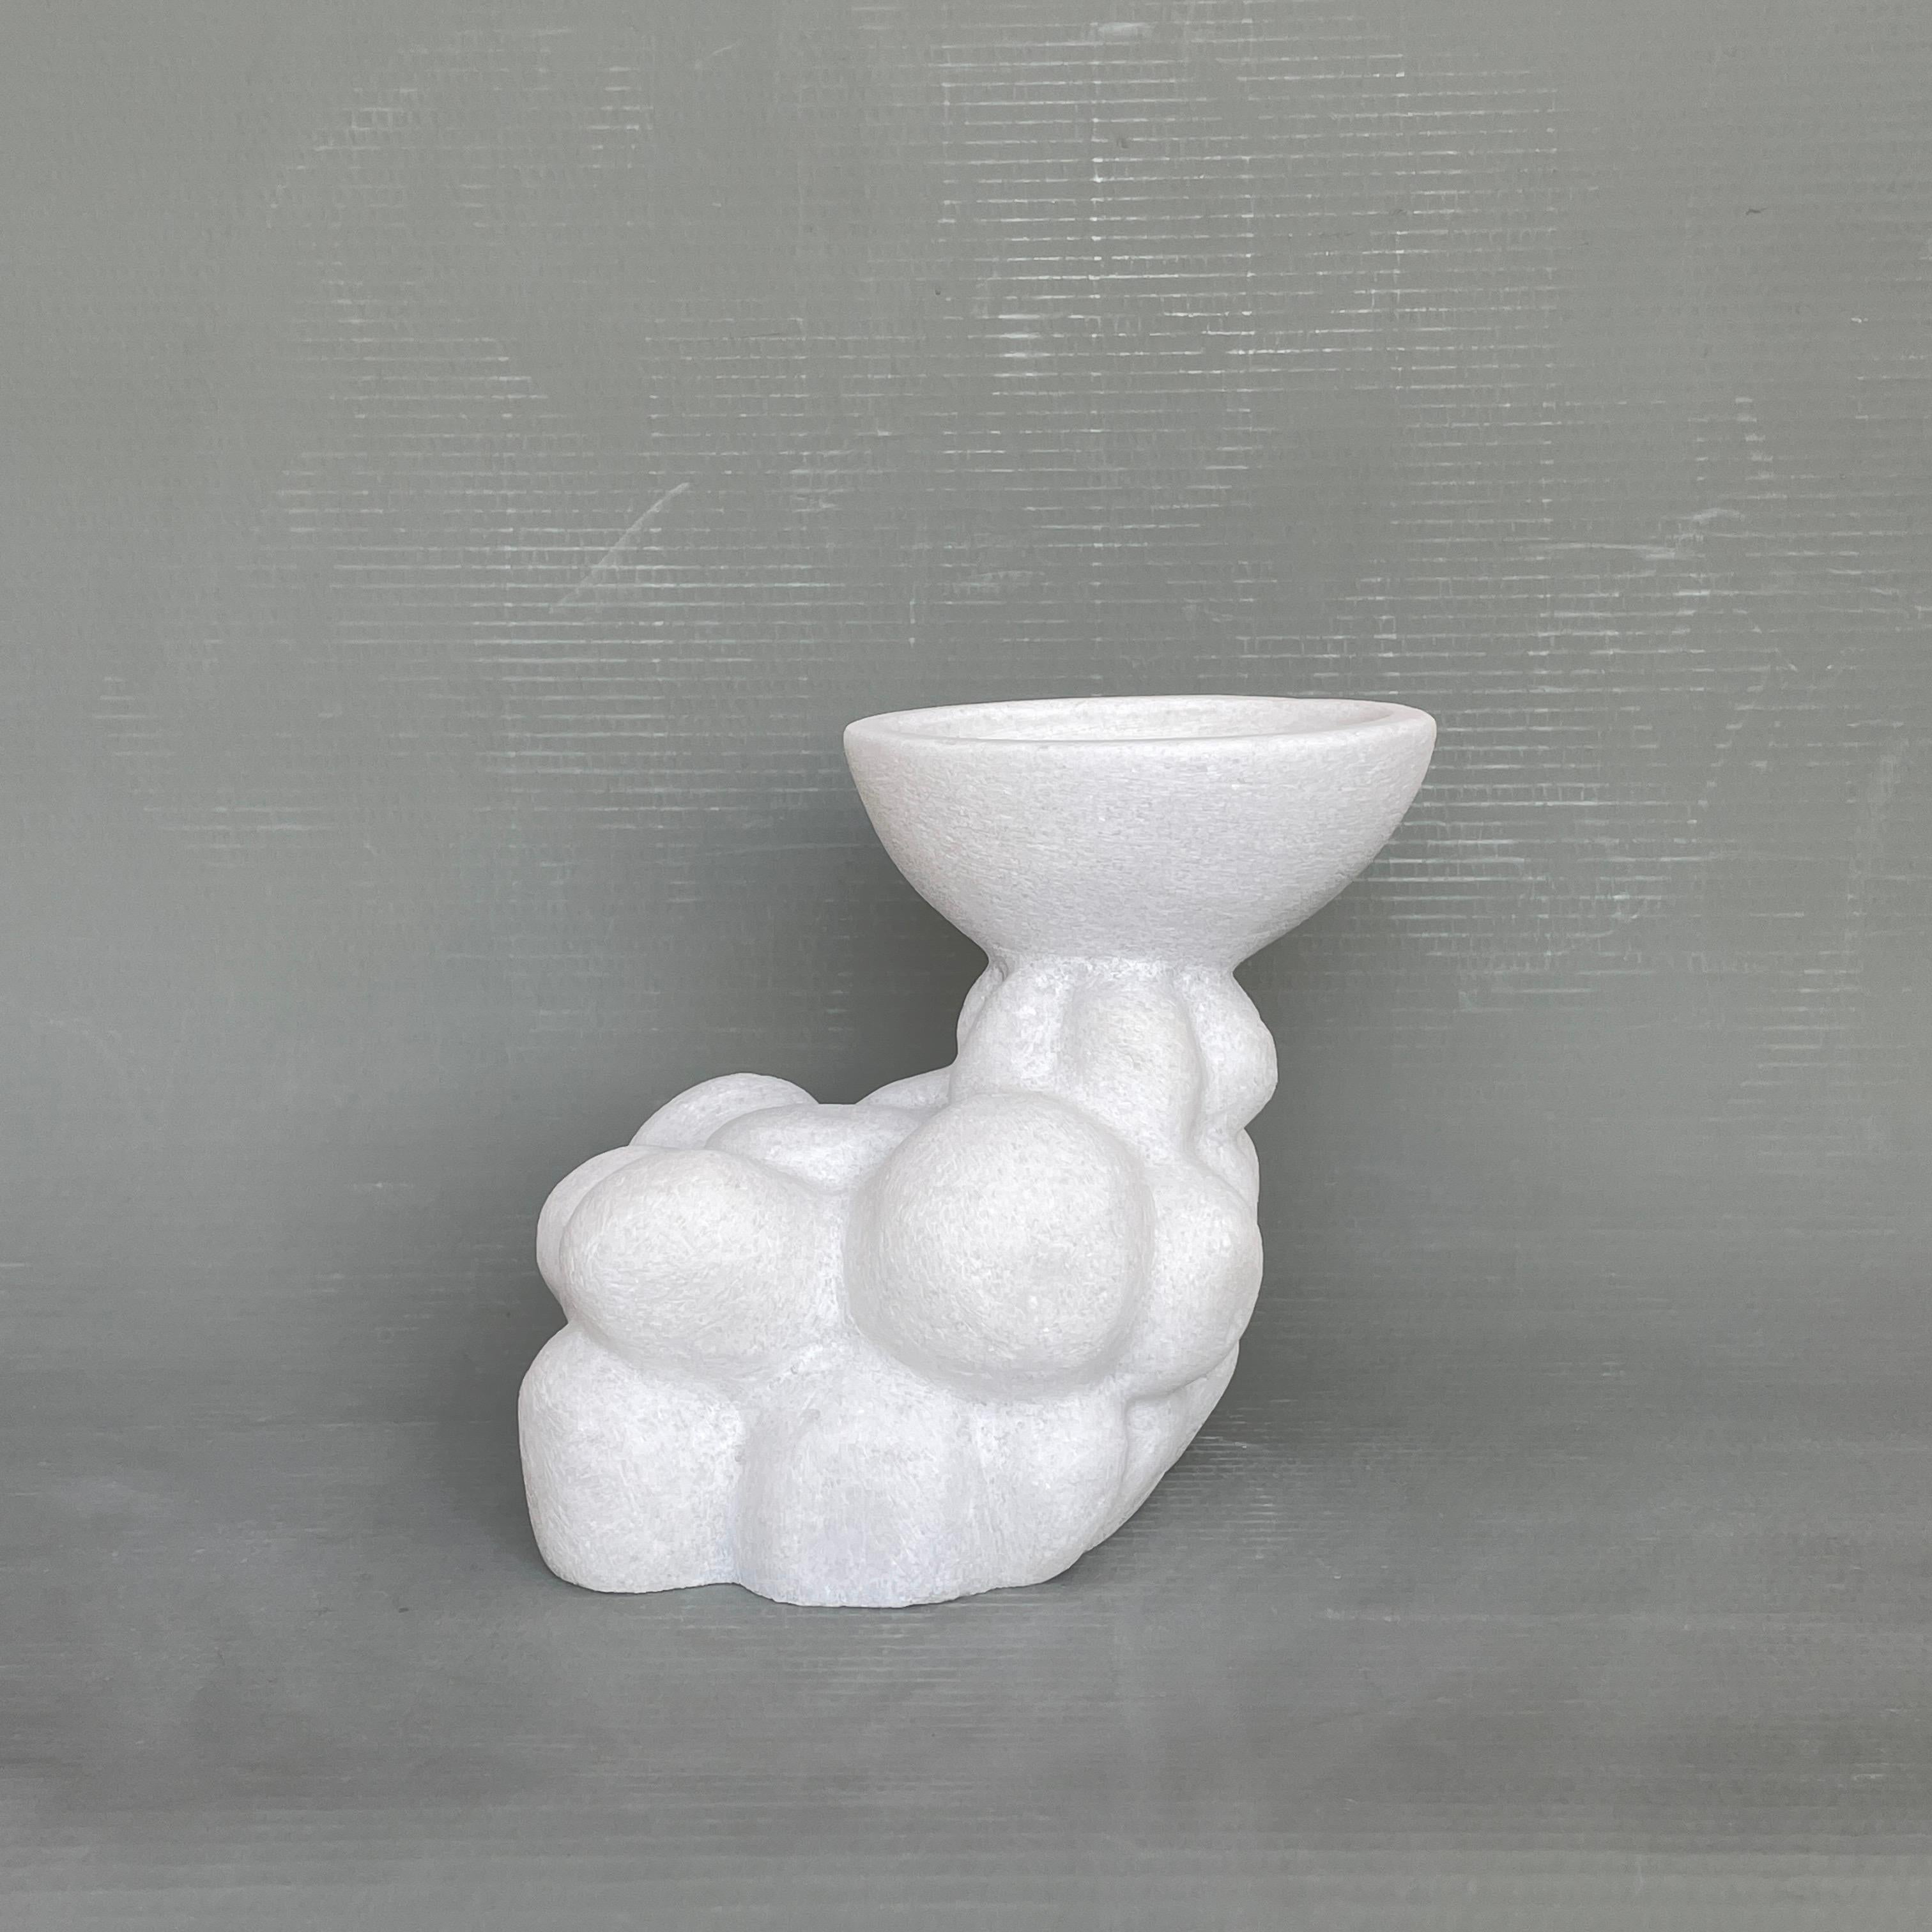 Round hand carved marble vessel by Tom Von Kaenel
Dimensions: D16 x W25 x H21 cm
Materials: Marble

Tom von Kaenel, sculptor and painter, was born in Switzerland in 1961. Already in his early childhood he was deeply devoted to art. His desire to